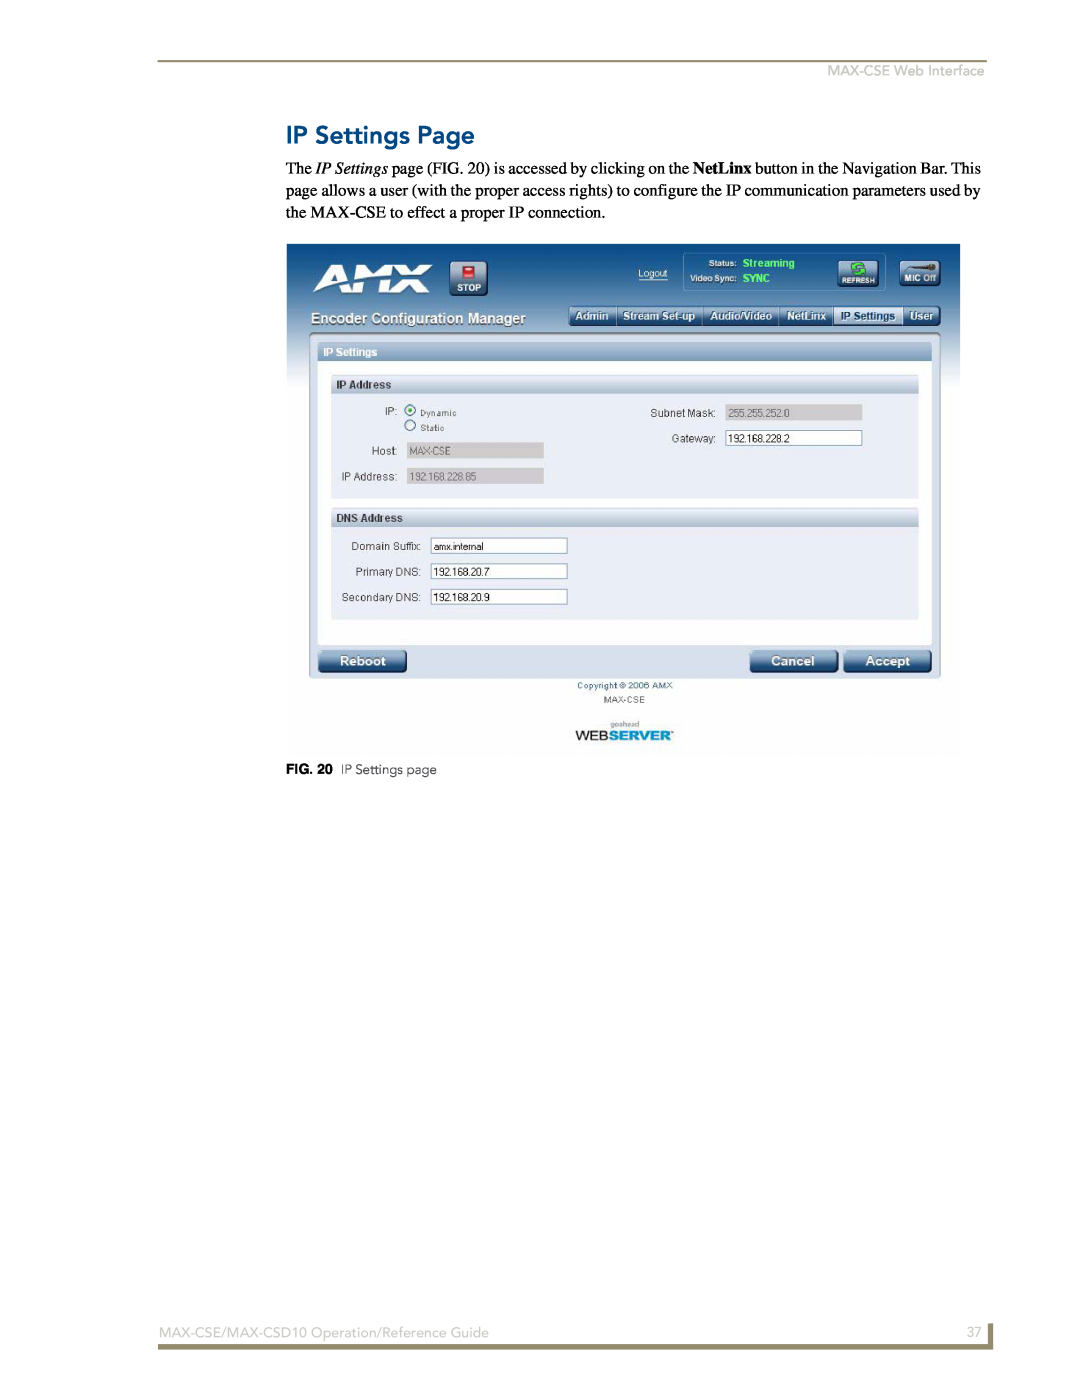 AMX manual IP Settings Page, MAX-CSEWeb Interface, MAX-CSE/MAX-CSD10Operation/Reference Guide, IP Settings page 